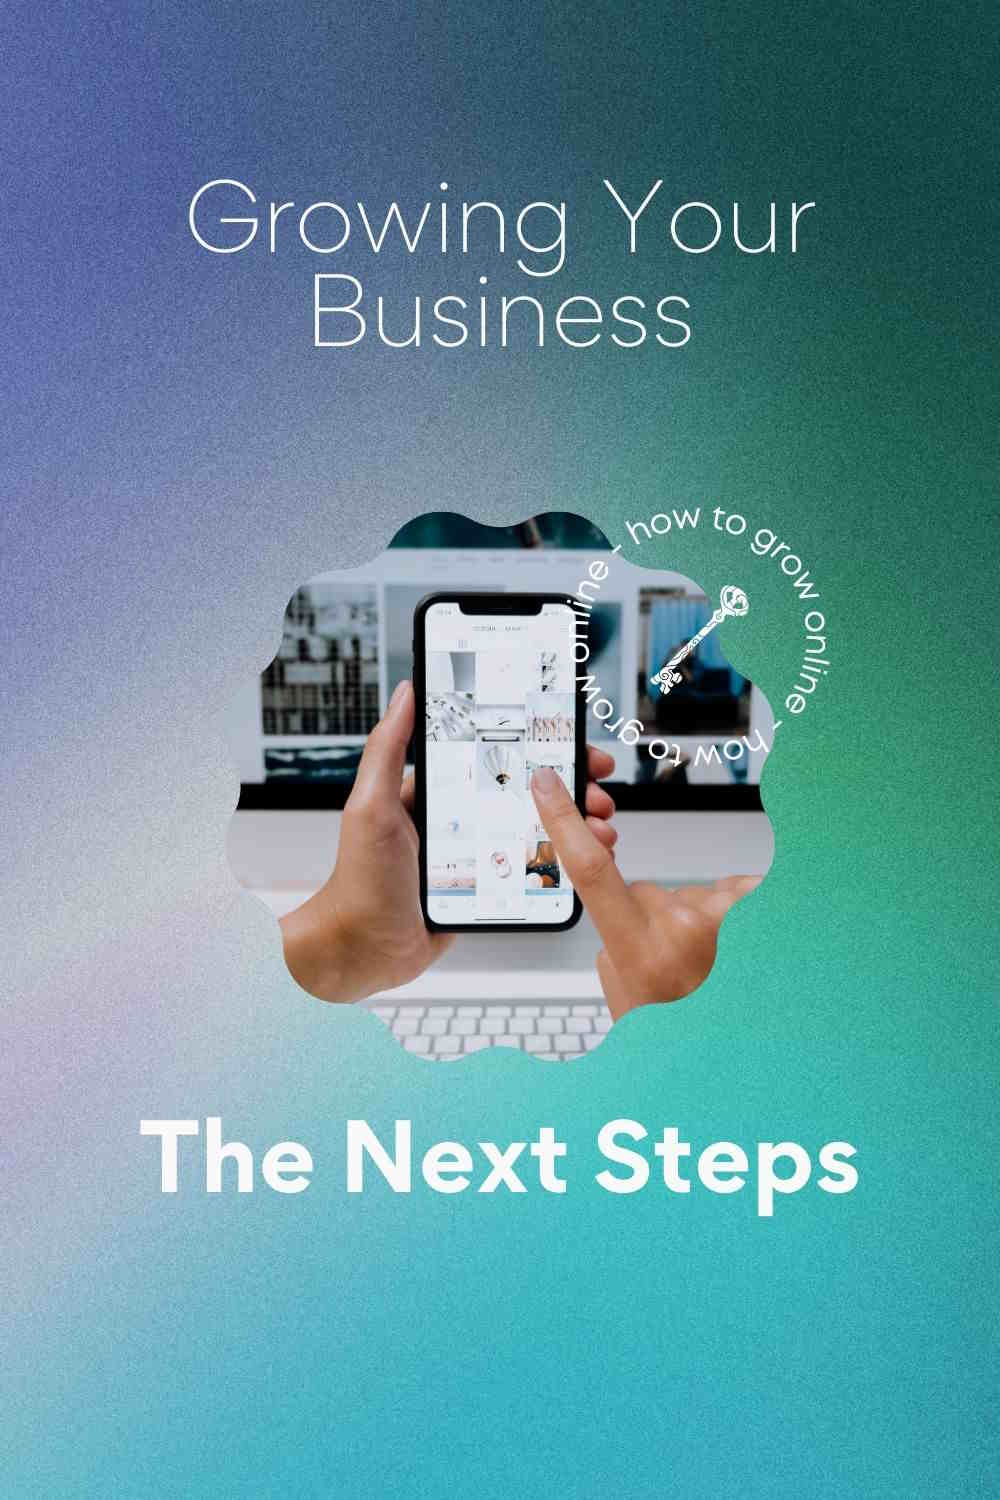 Growing Your Business: The Next Steps